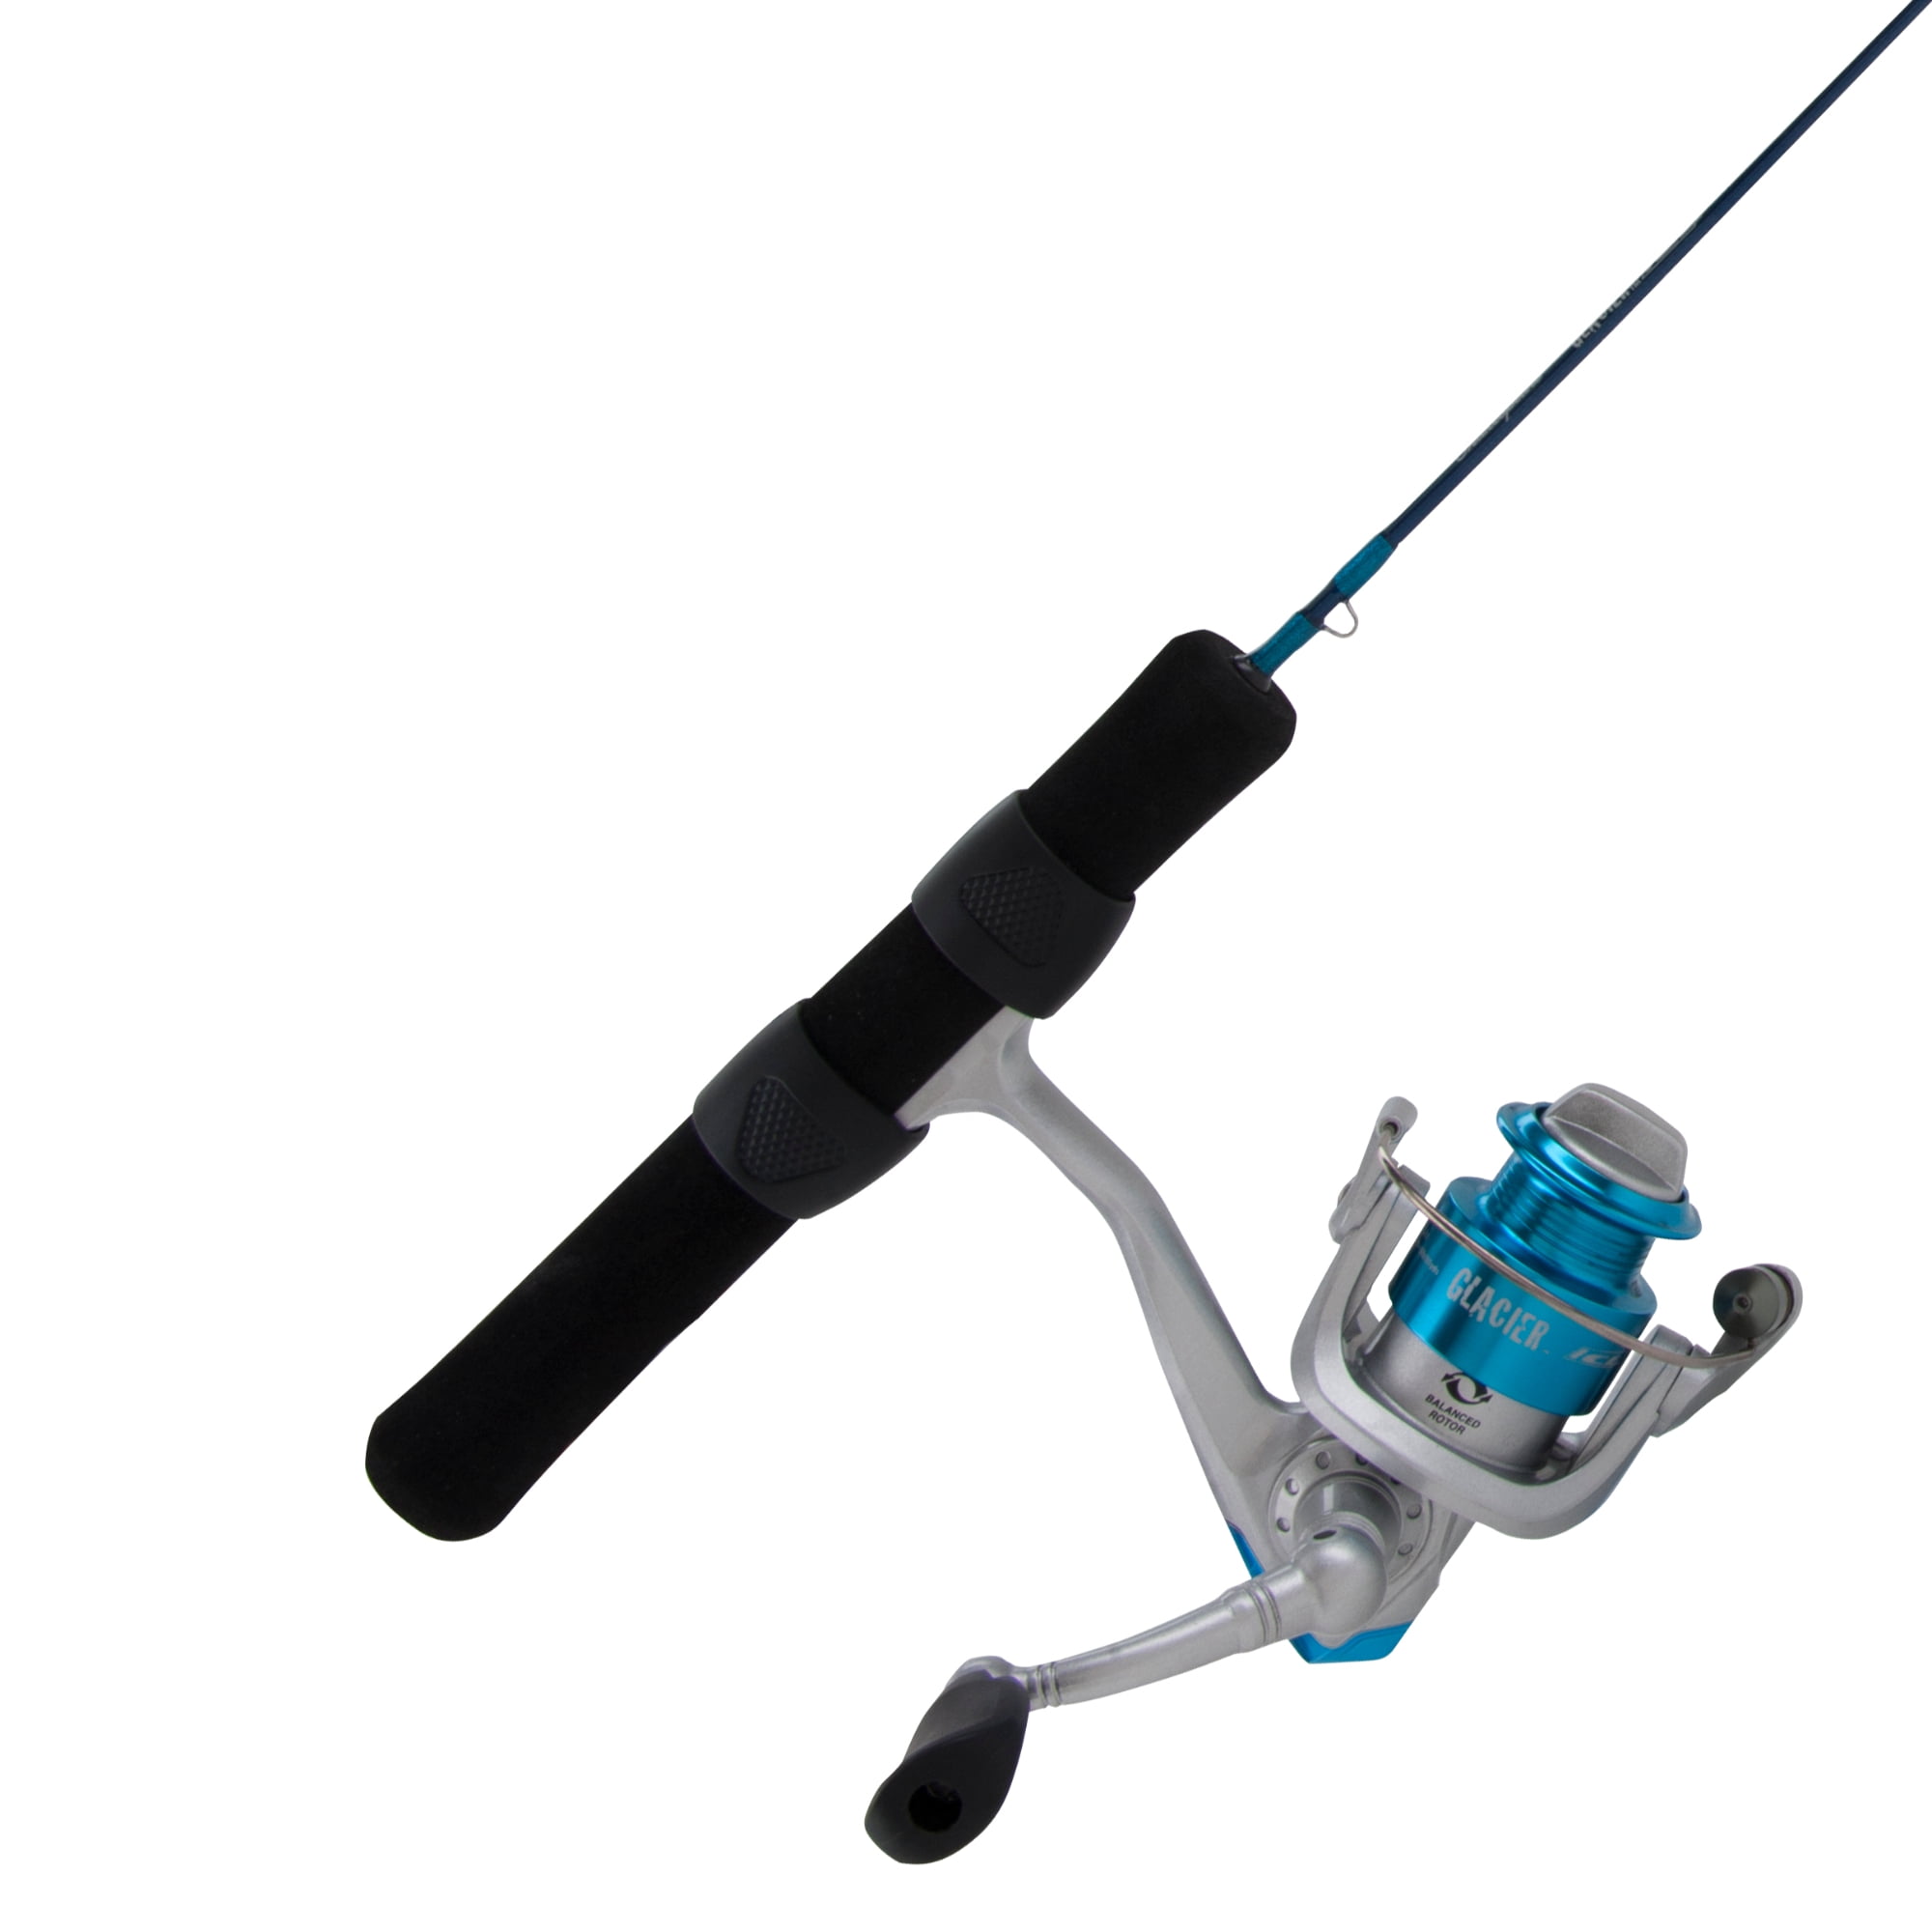 Shakespeare Glacier Ice Fishing Rod and Spinning Reel Combo 